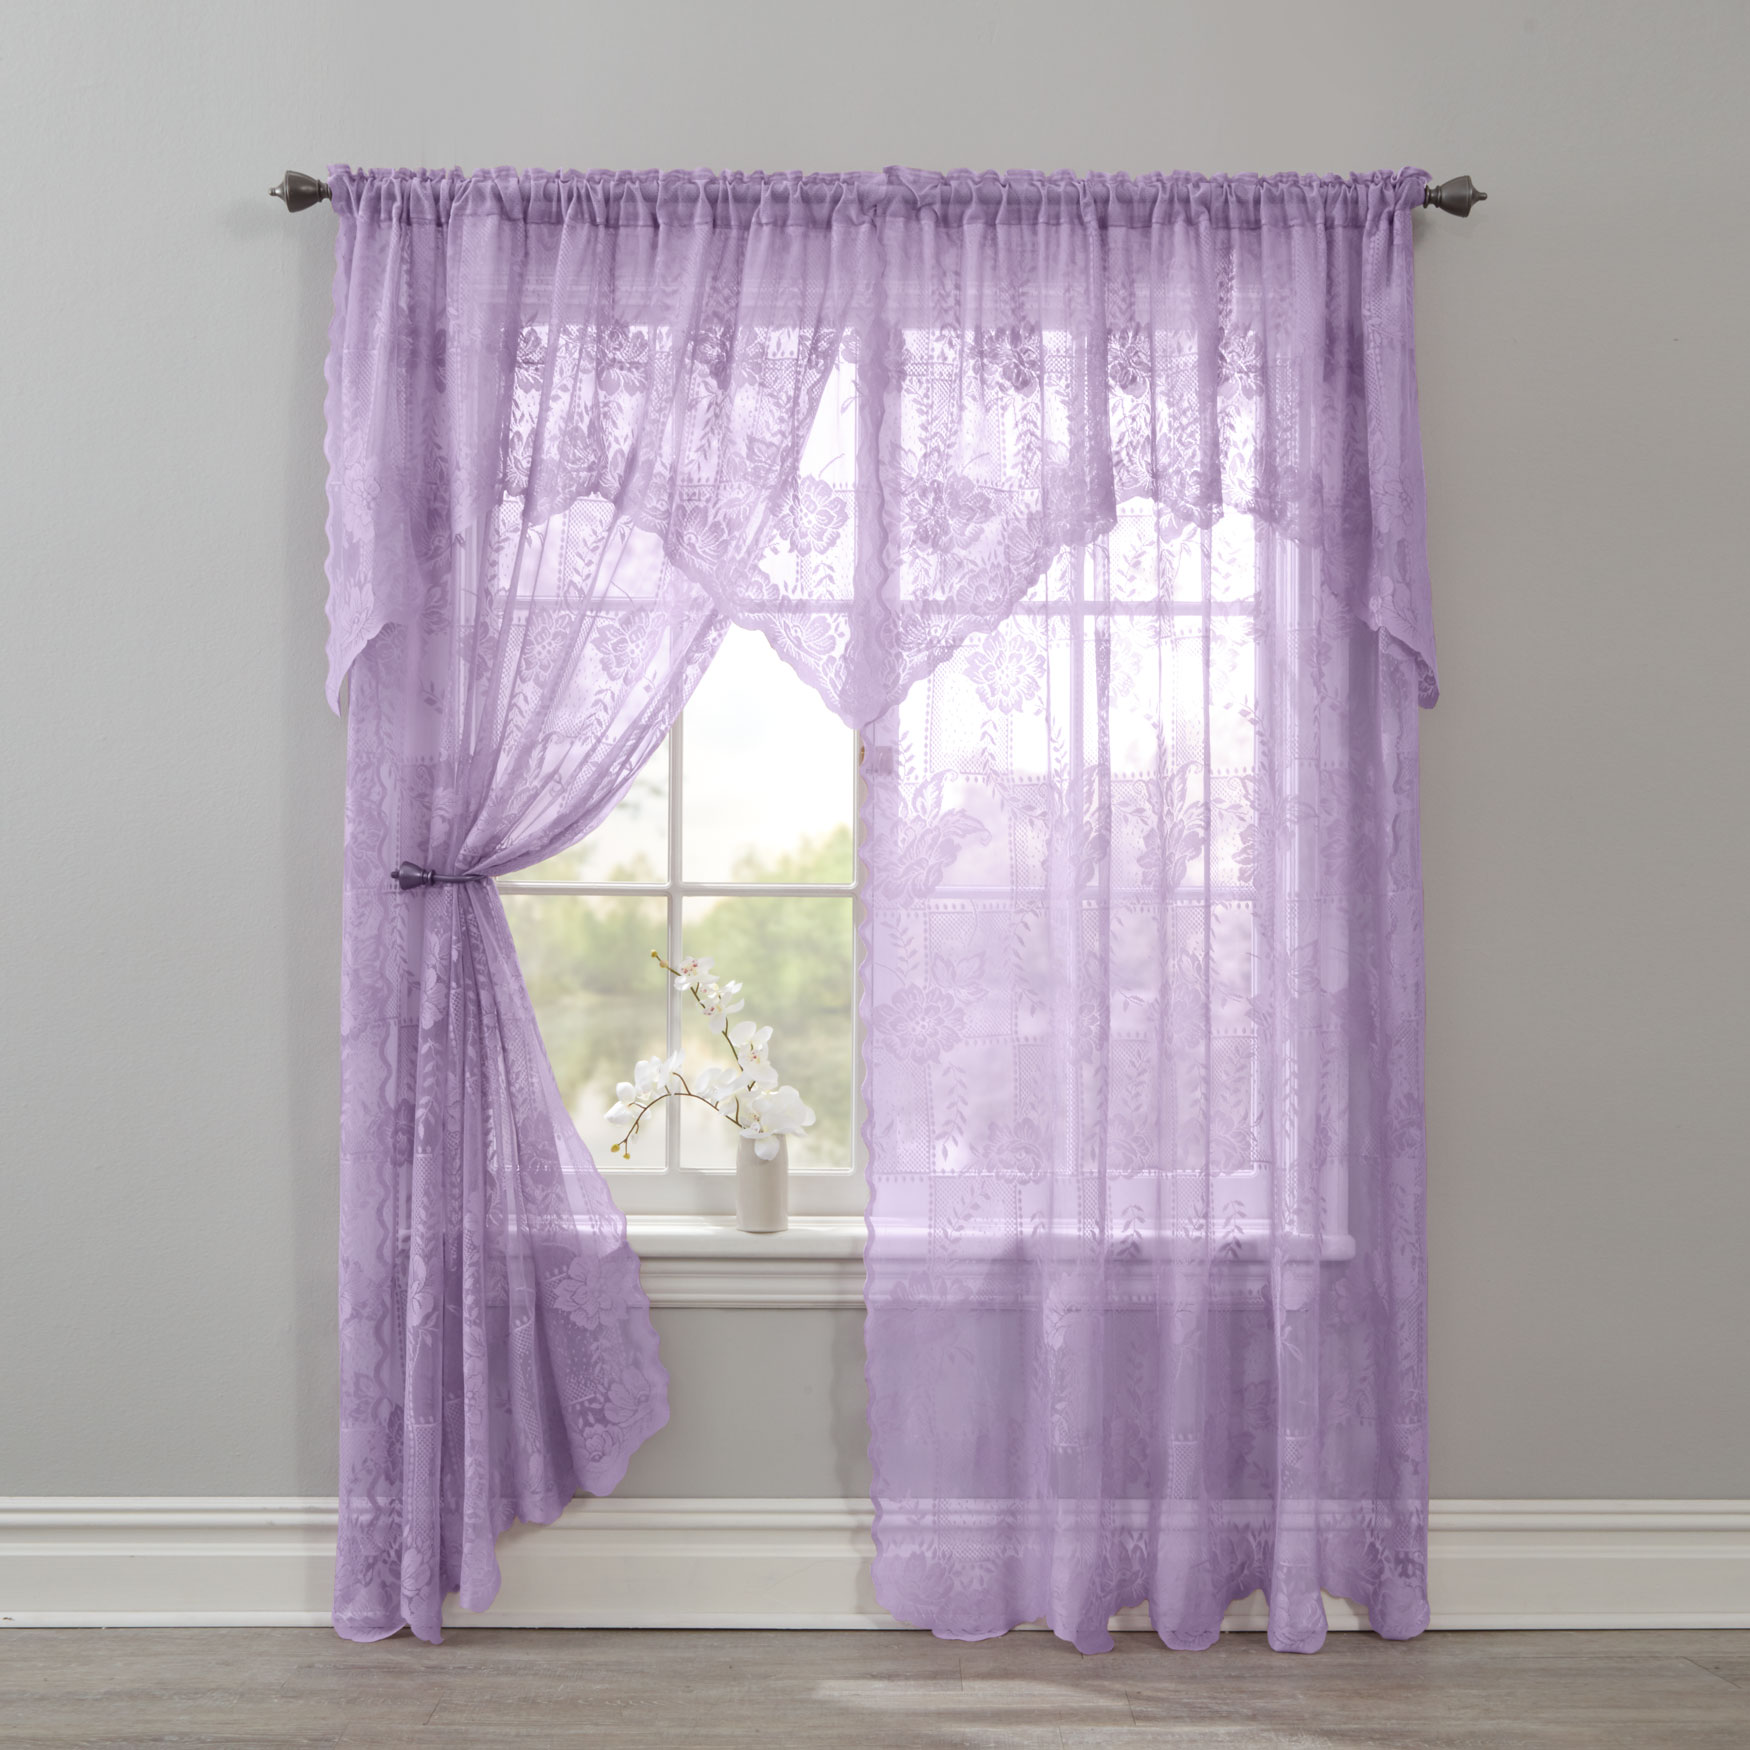 BH Studio Ella Floral Lace Panel with Attached Valance, 